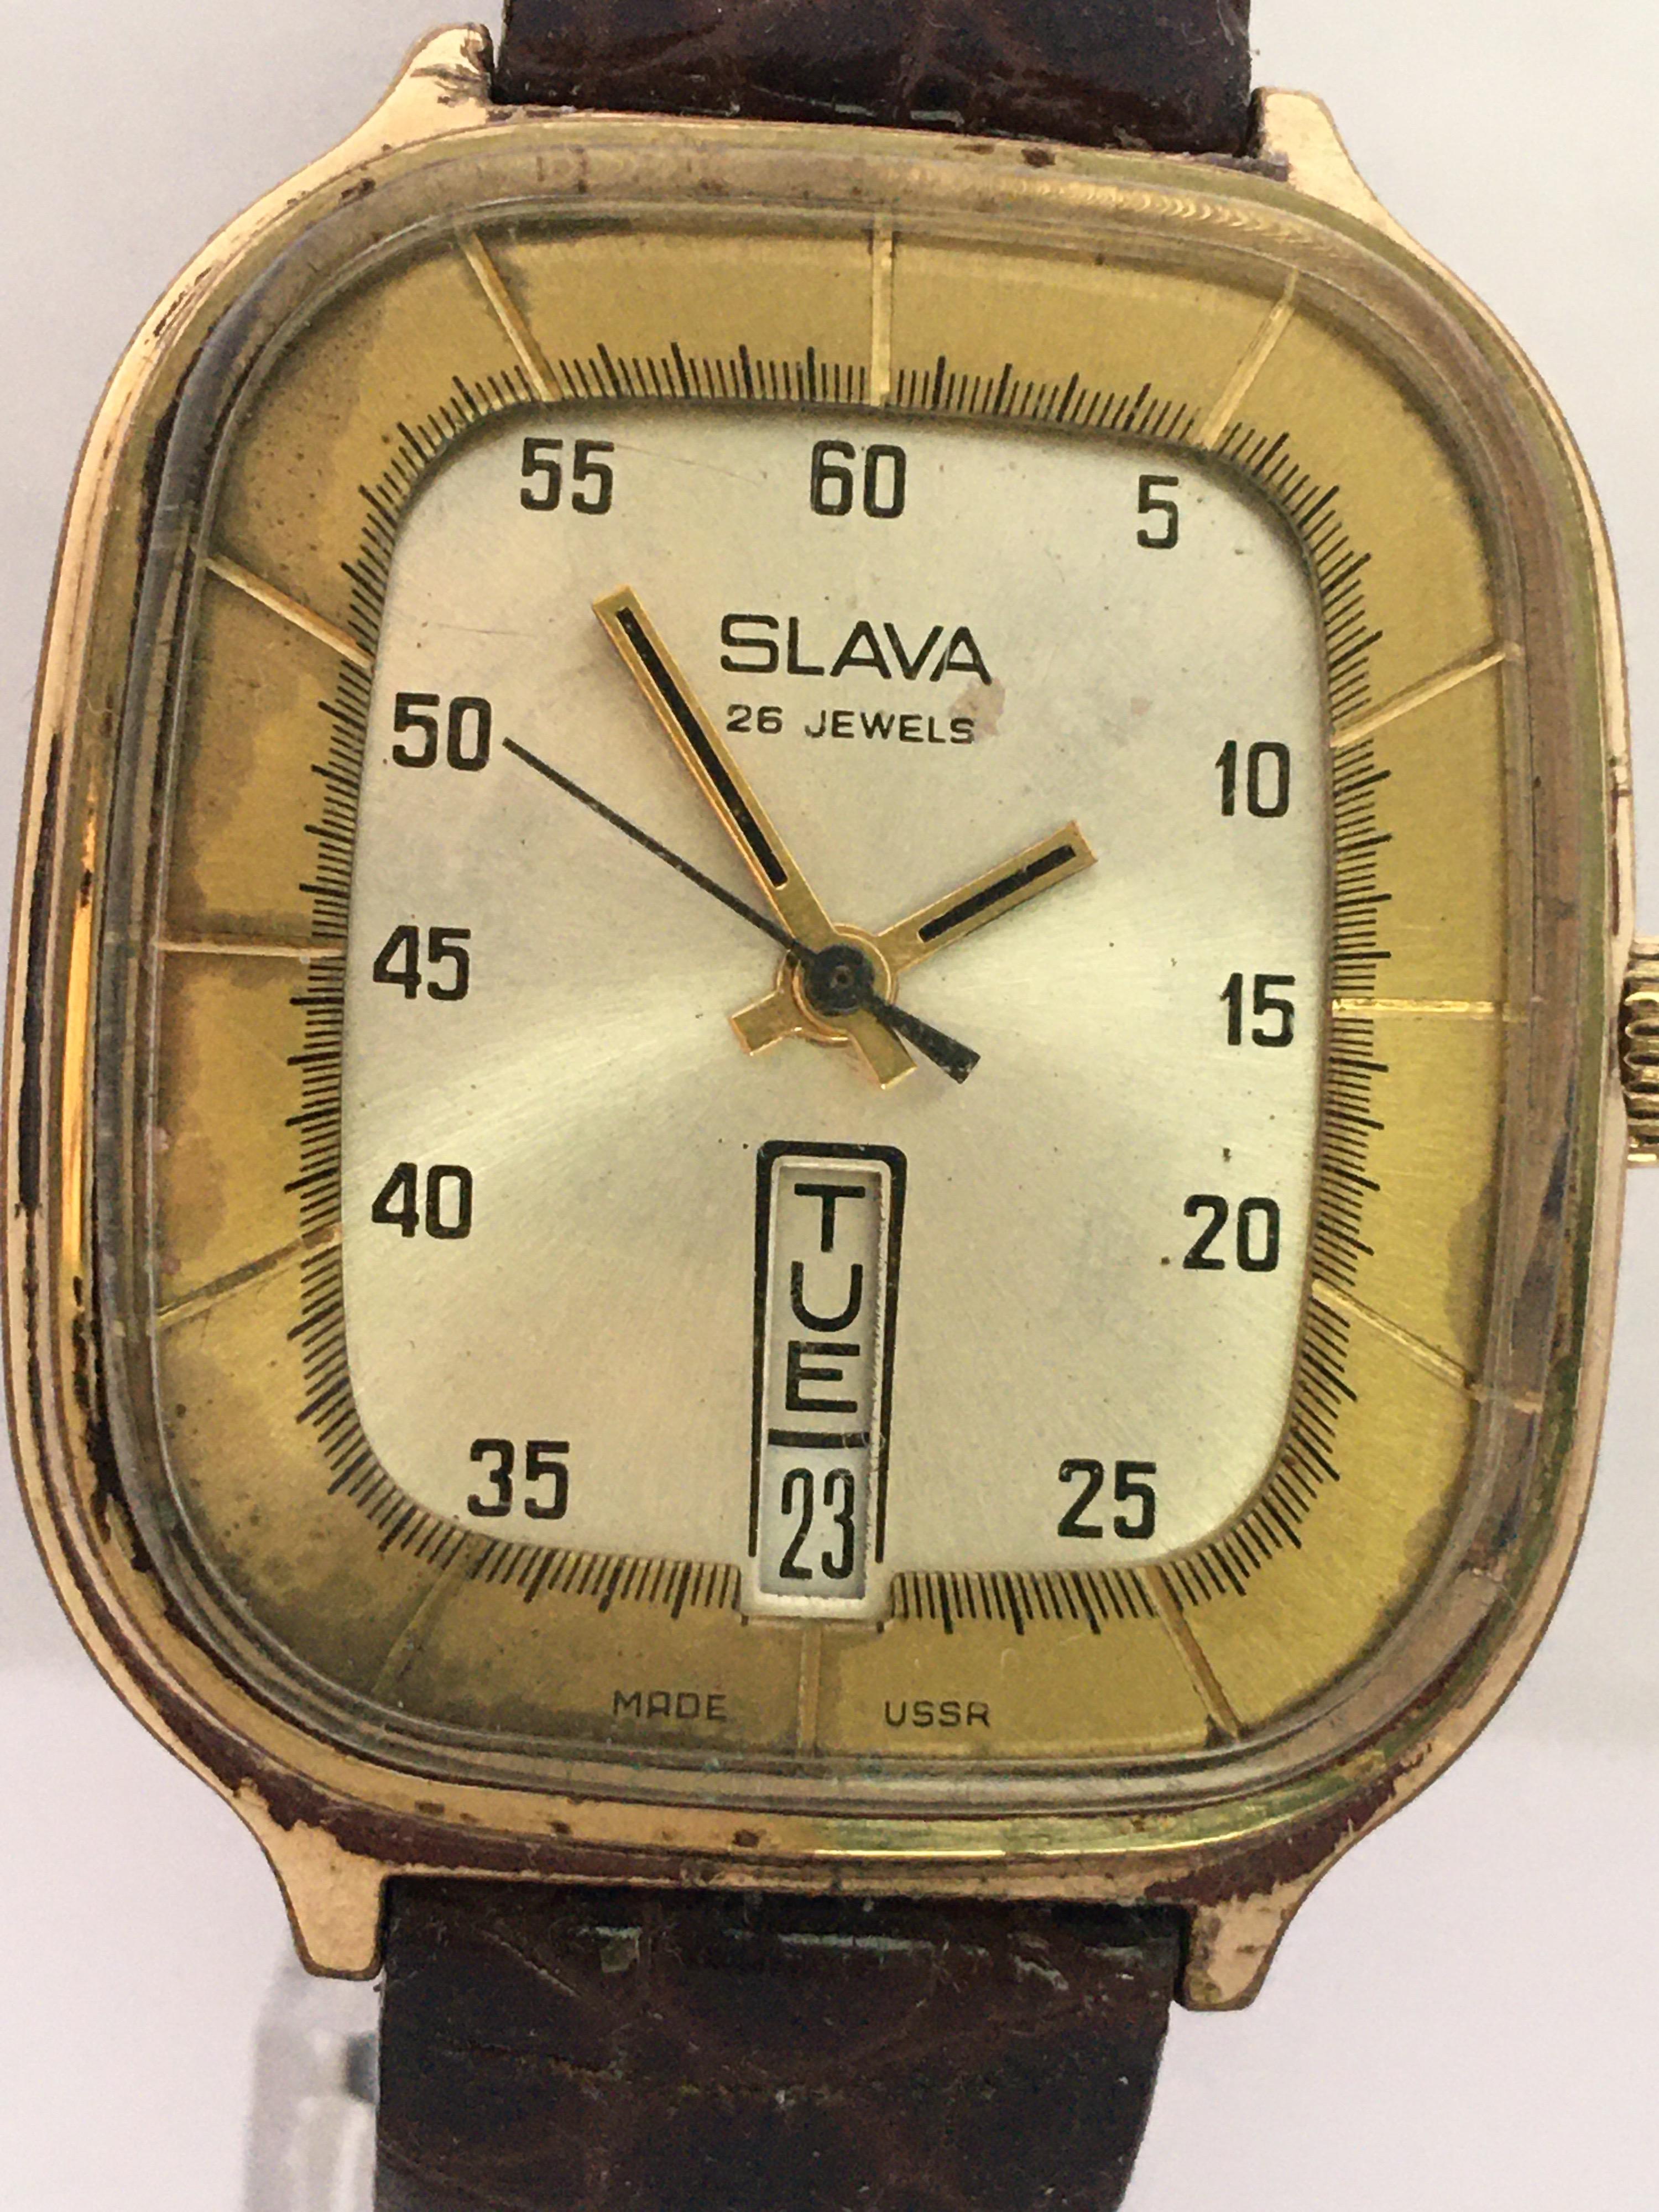 Vintage 1970s Gold-Plated Slava 26 Jewels Date Mechanical Gents Watch In Good Condition For Sale In Carlisle, GB